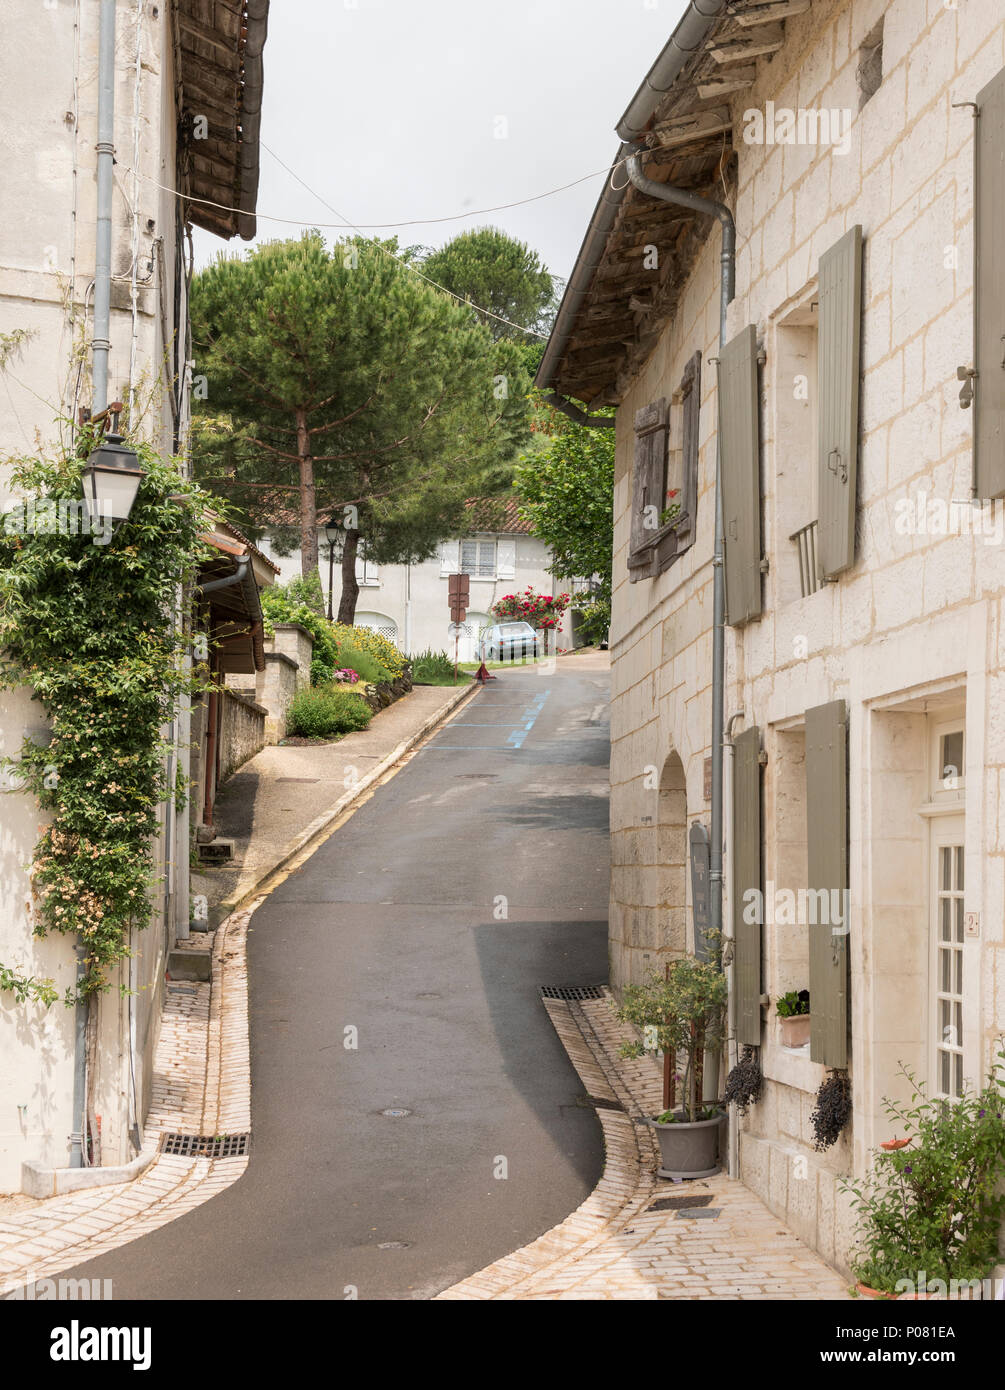 Aubeterre-sur-Dronne, listed as one of the most beautiful villages in France. Stock Photo